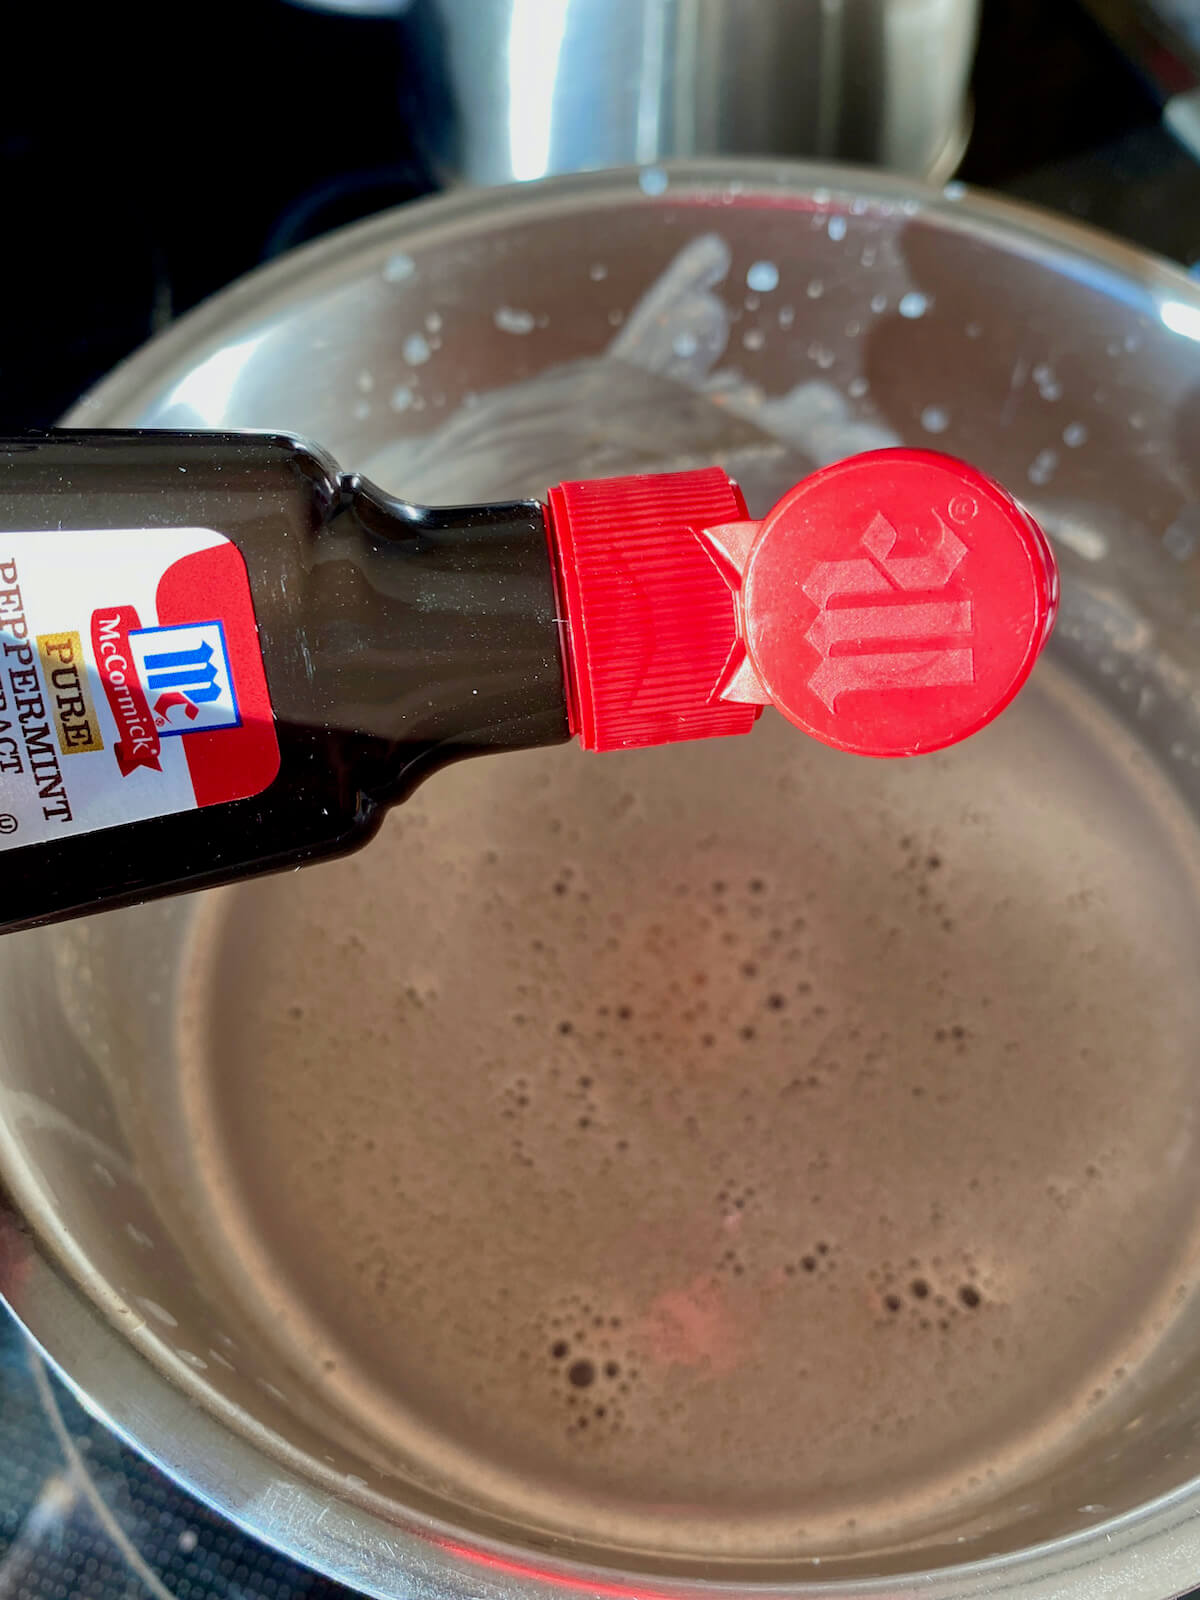 A bottle of peppermint extract being held above a saucepan filled with homemade hot chocolate.